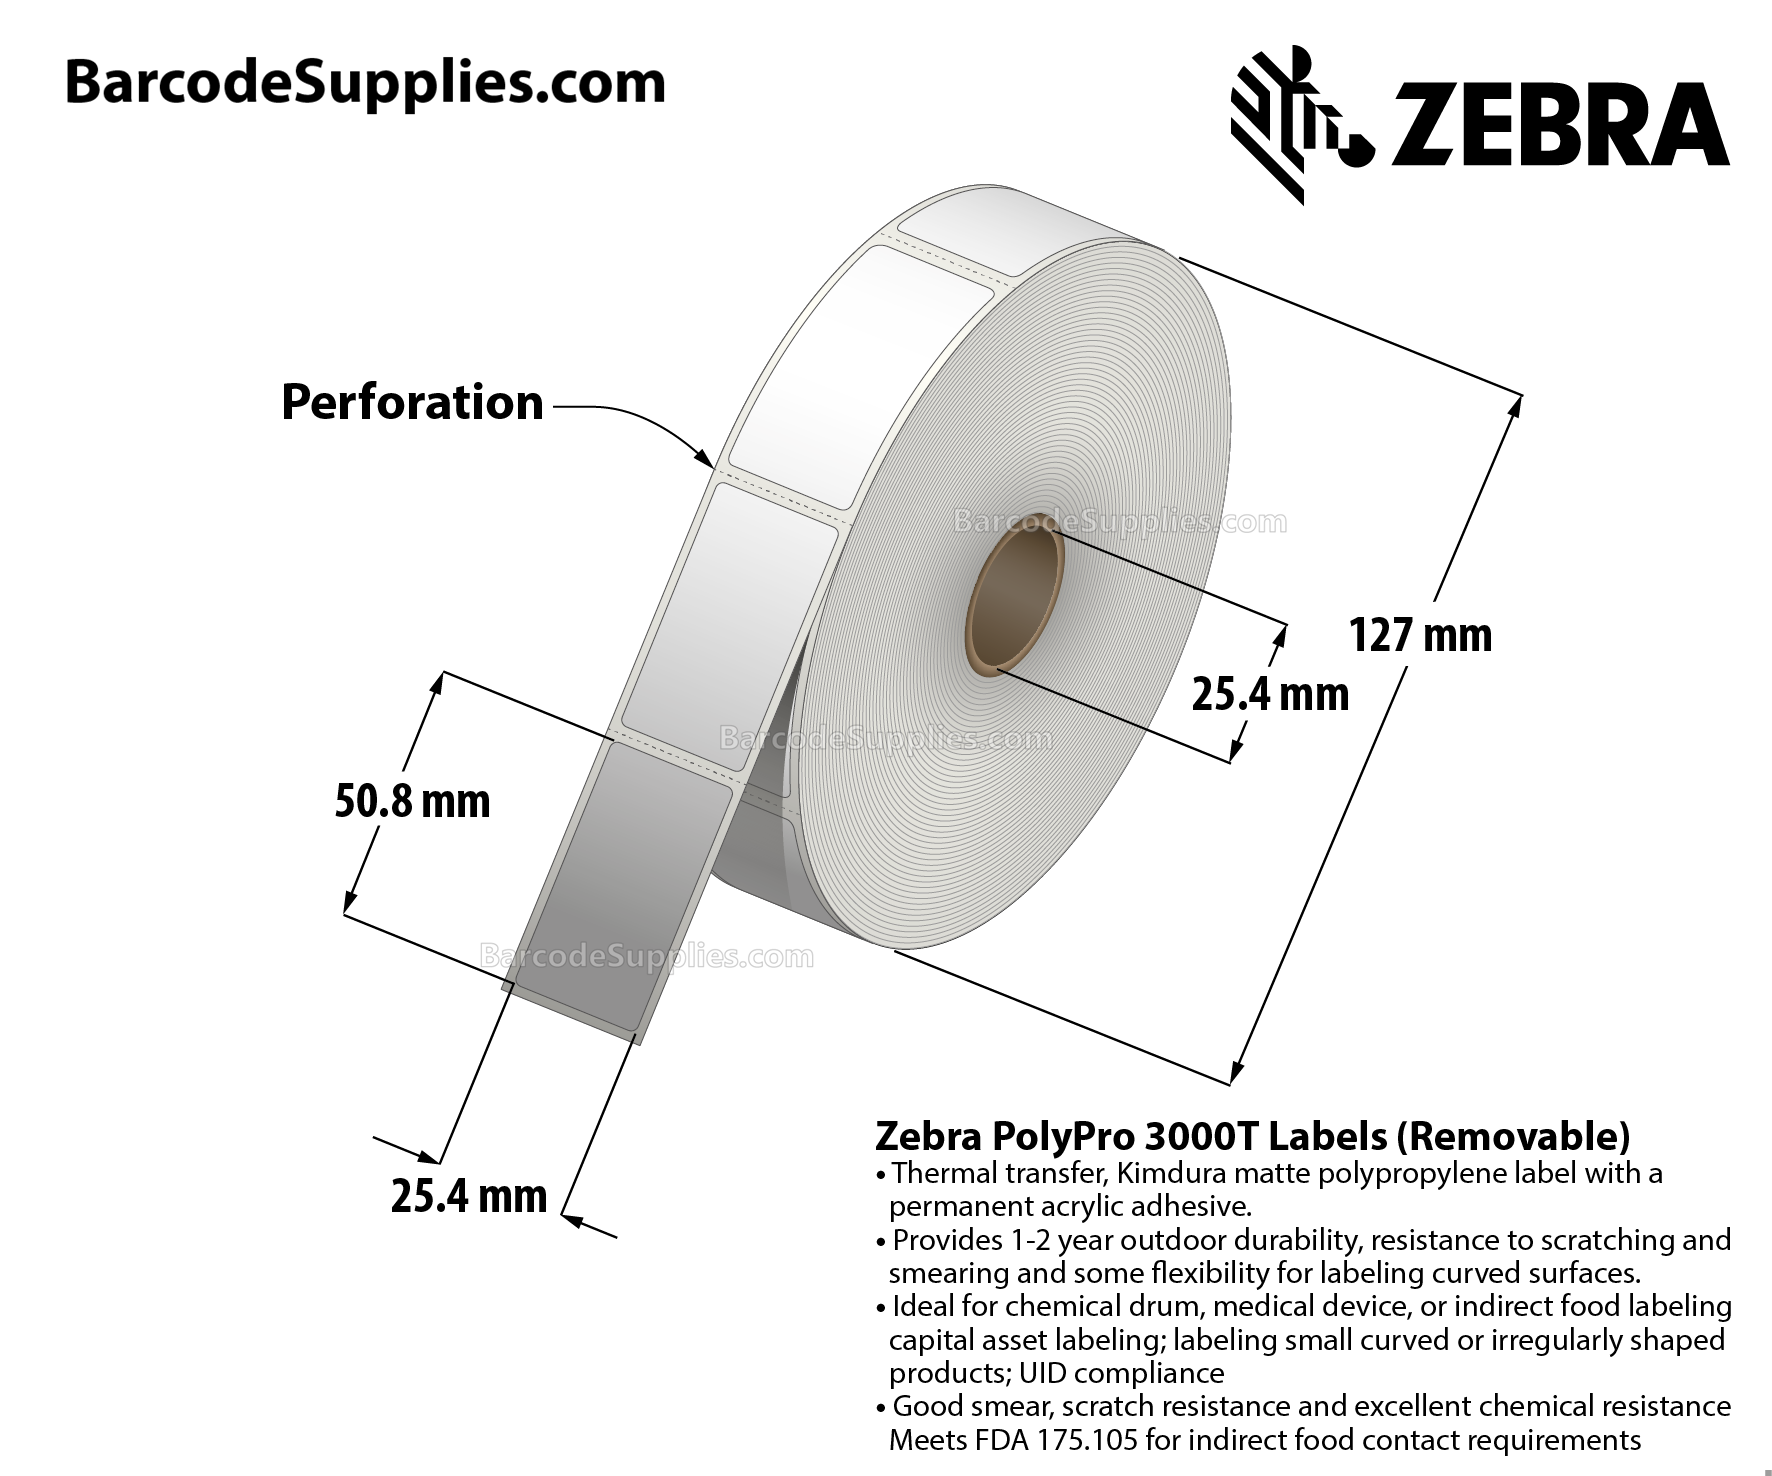 1 x 2 Thermal Transfer White PolyPro 4000T Removable Labels With Removable Adhesive - Perforated - 1025 Labels Per Roll - Carton Of 1 Rolls - 1025 Labels Total - MPN: 10022931